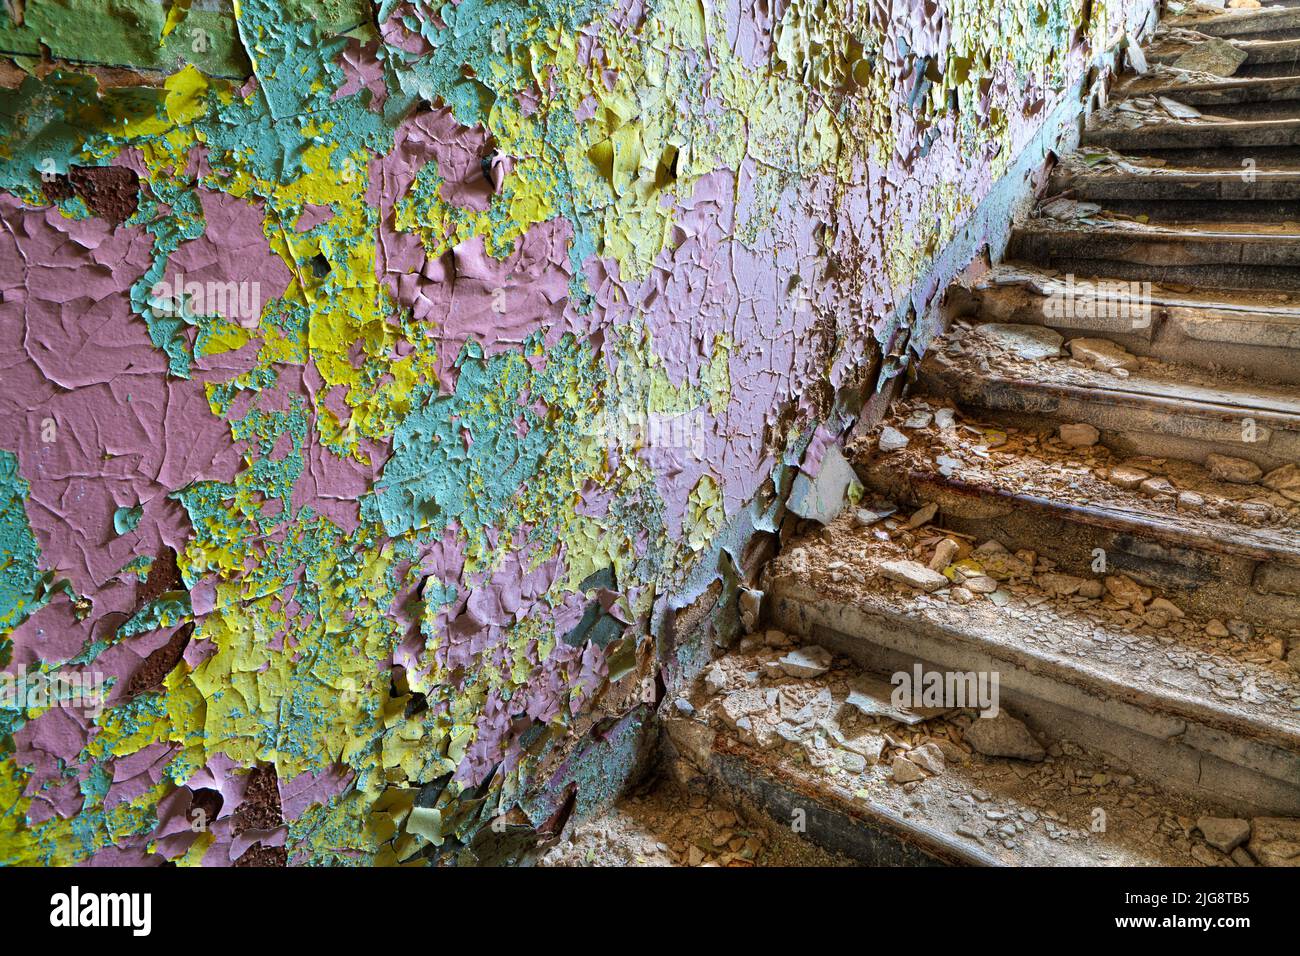 Stairs in an Abandoned Building Stock Photo